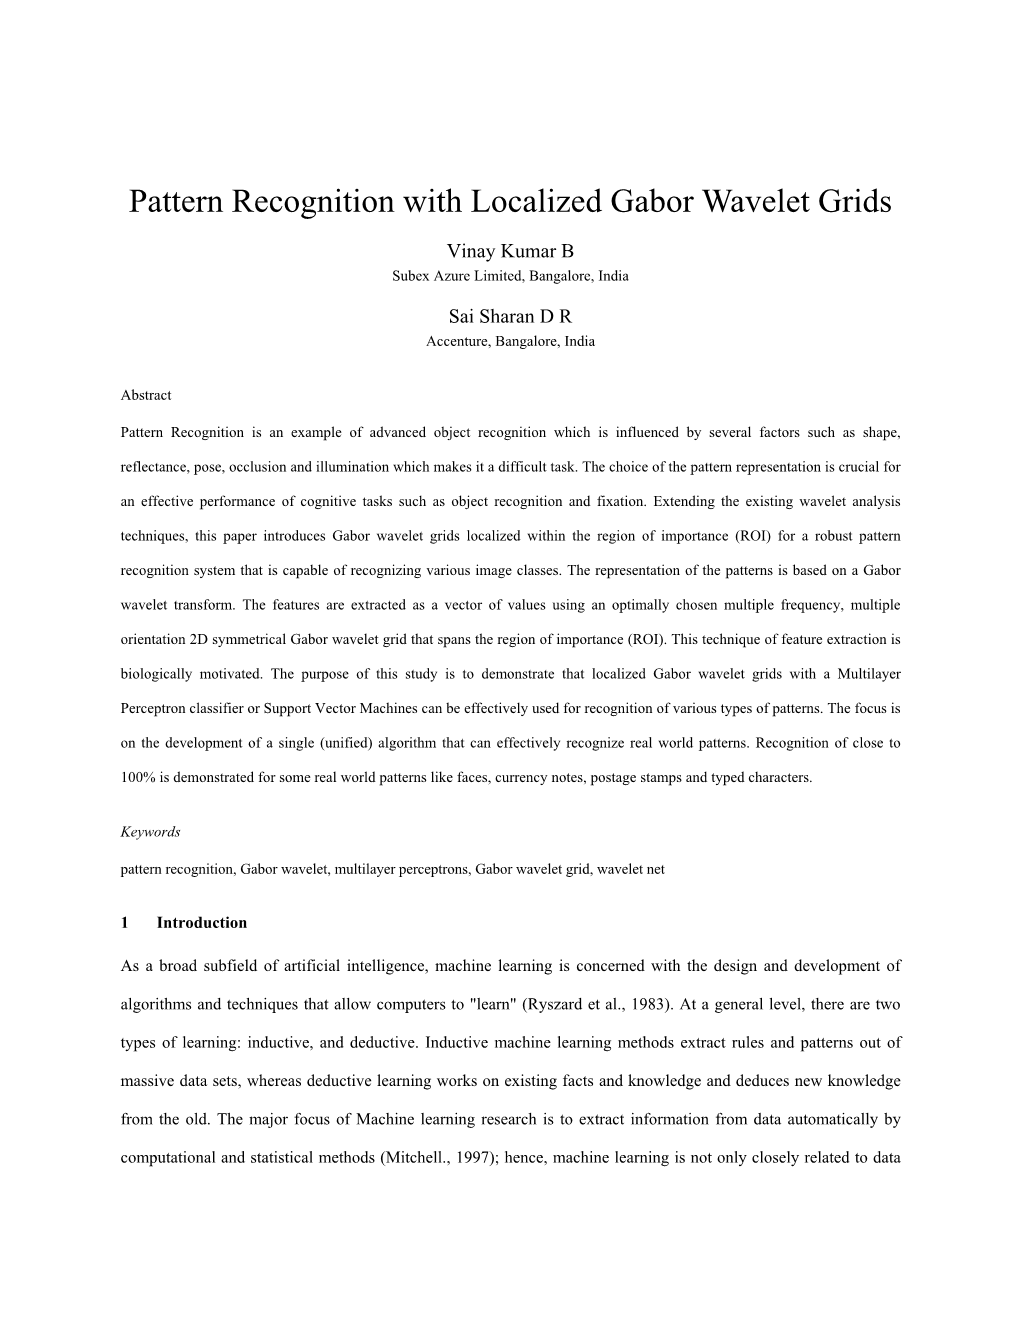 Pattern Recognition with Localized Gabor Wavelet Grids